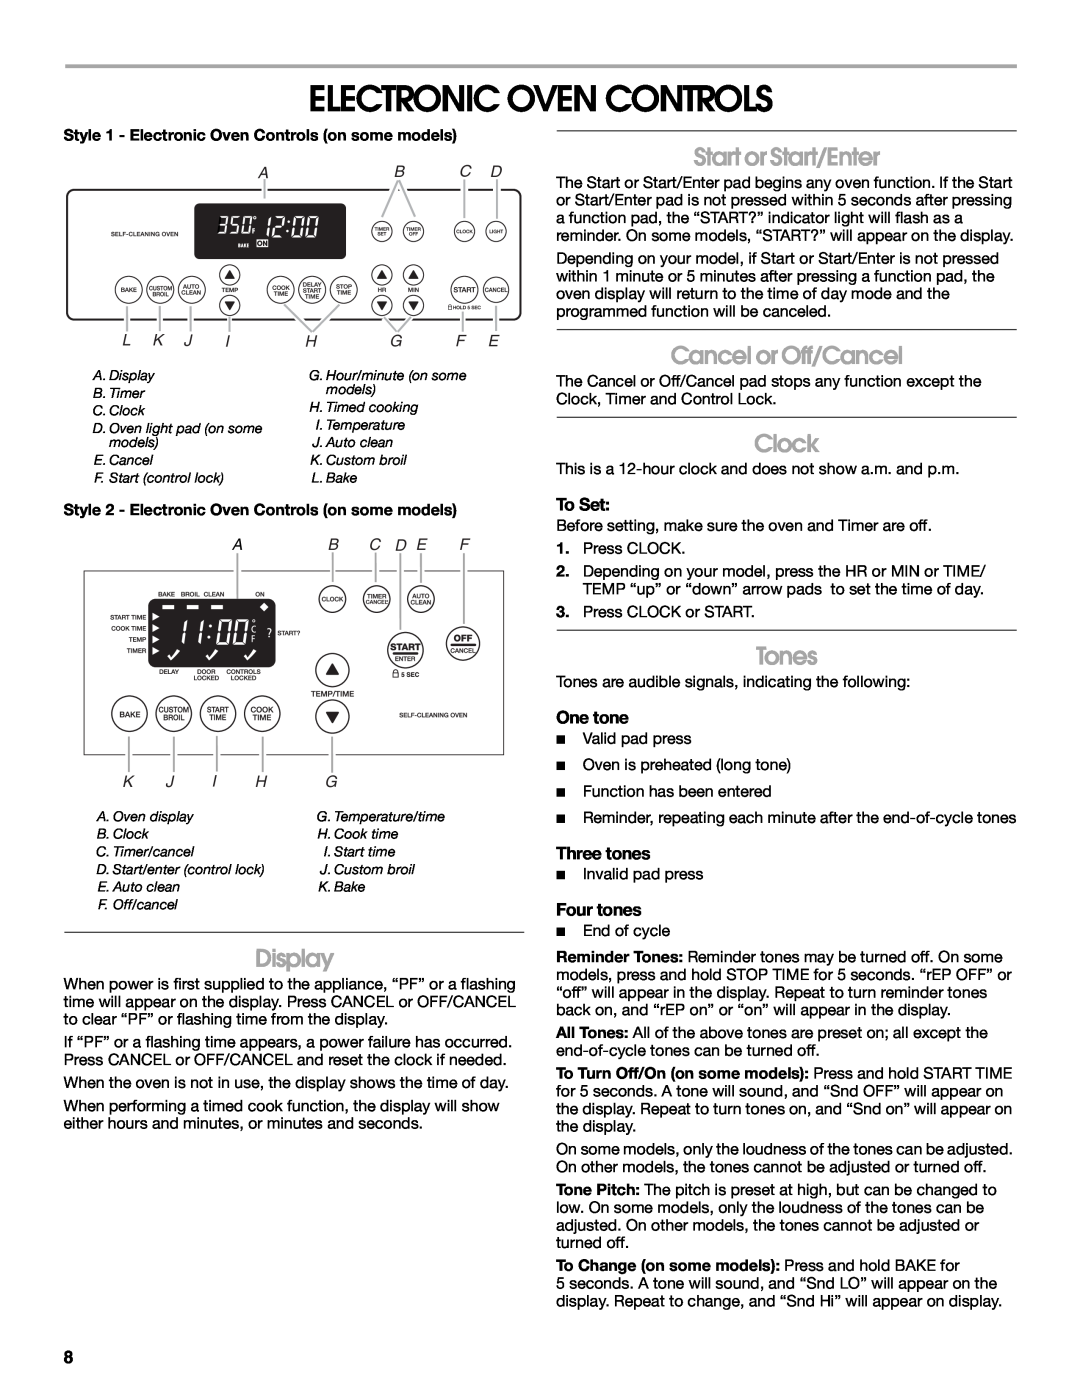 IKEA Range Electronic Oven Controls, Start or Start/Enter, Cancel or Off/Cancel, Clock, Display, Tones, To Set, One tone 